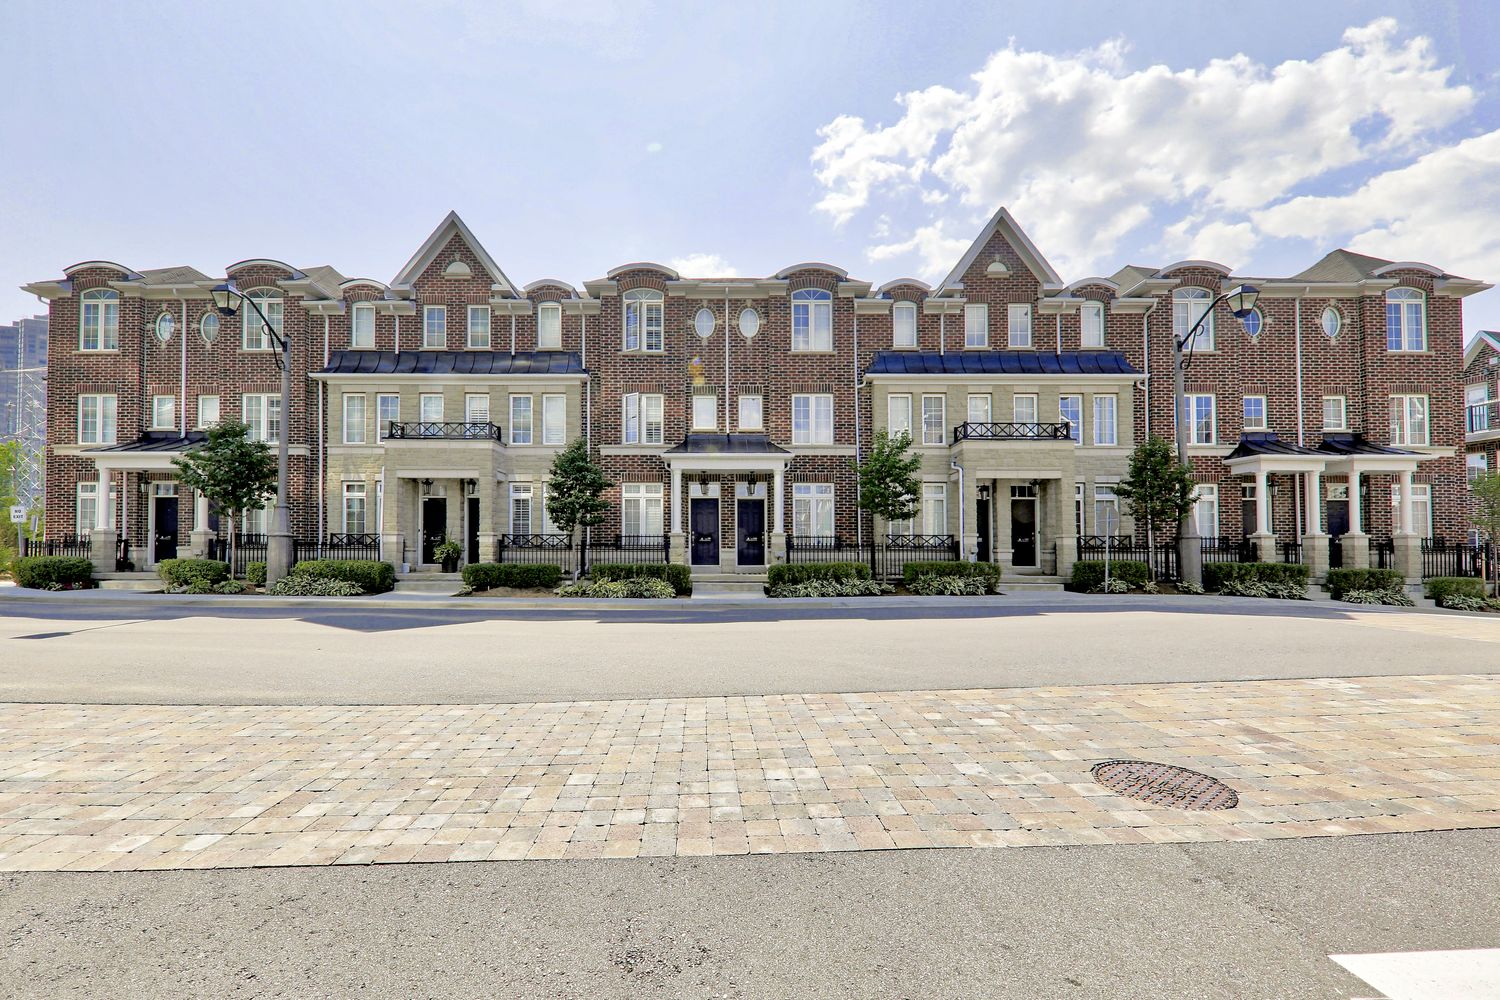 8 Windermere Avenue. Windermere by The Lake Townhomes is located in  West End, Toronto - image #1 of 4